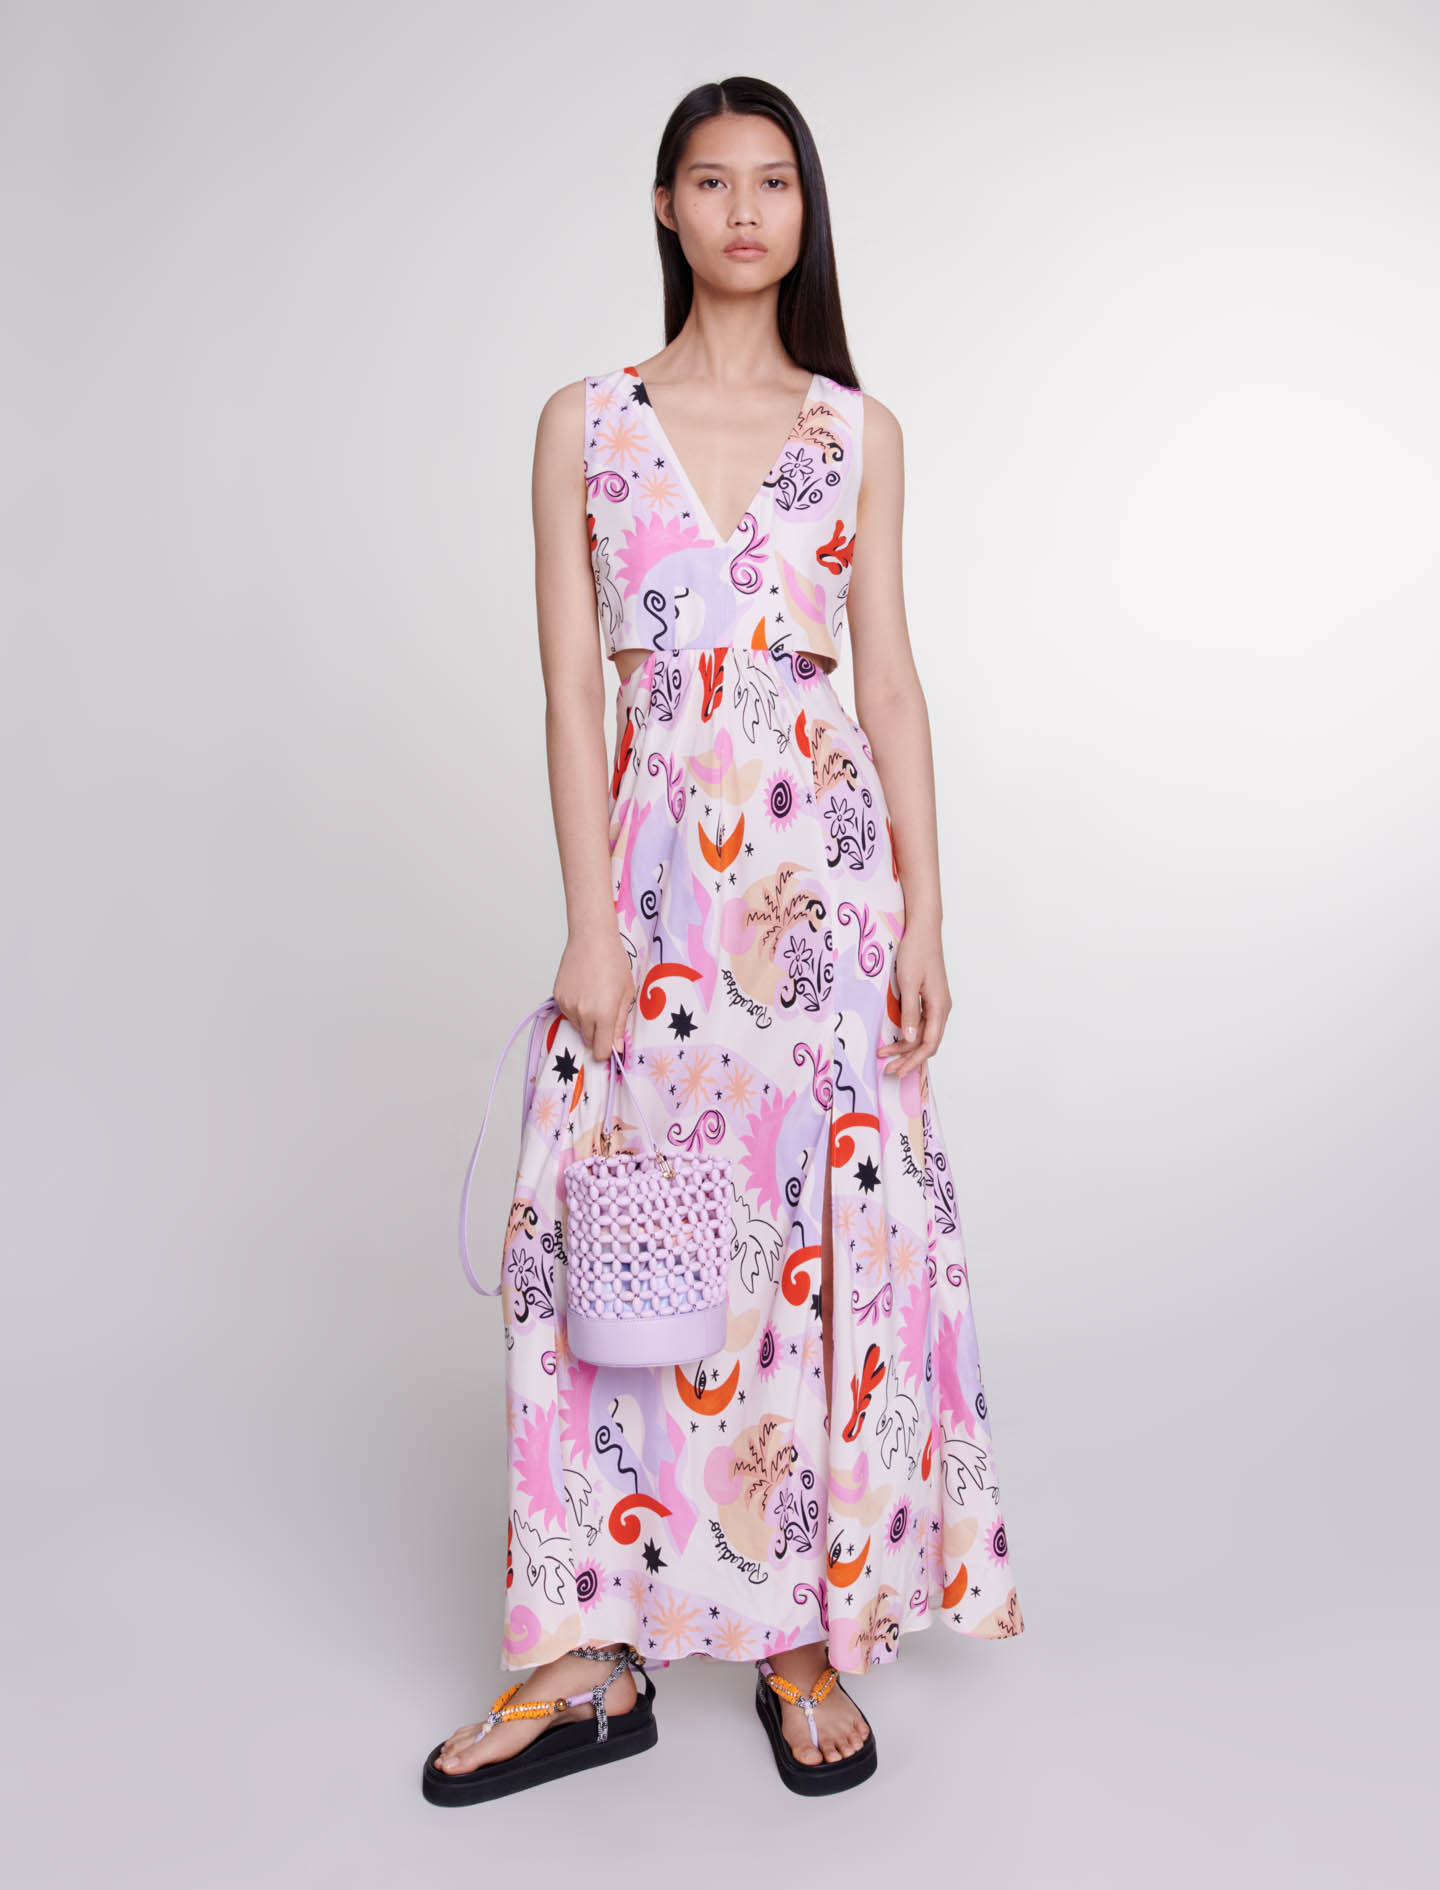 Maje Woman's silk Buttons: Cutaway silk maxi dress for Spring/Summer, in color Paradisio Print /